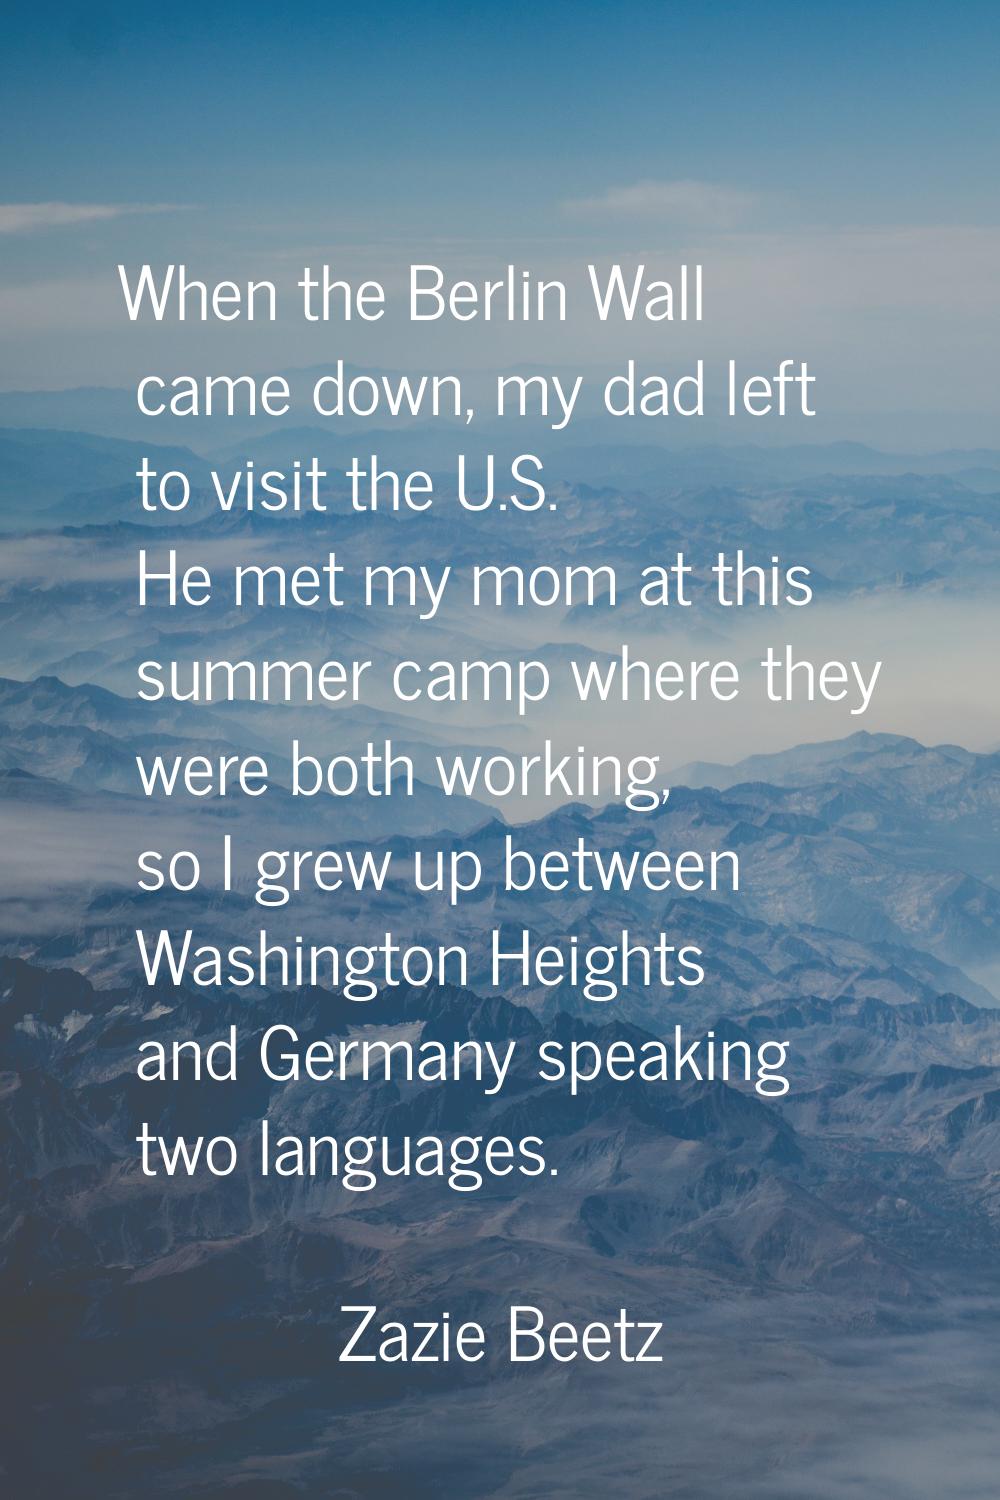 When the Berlin Wall came down, my dad left to visit the U.S. He met my mom at this summer camp whe